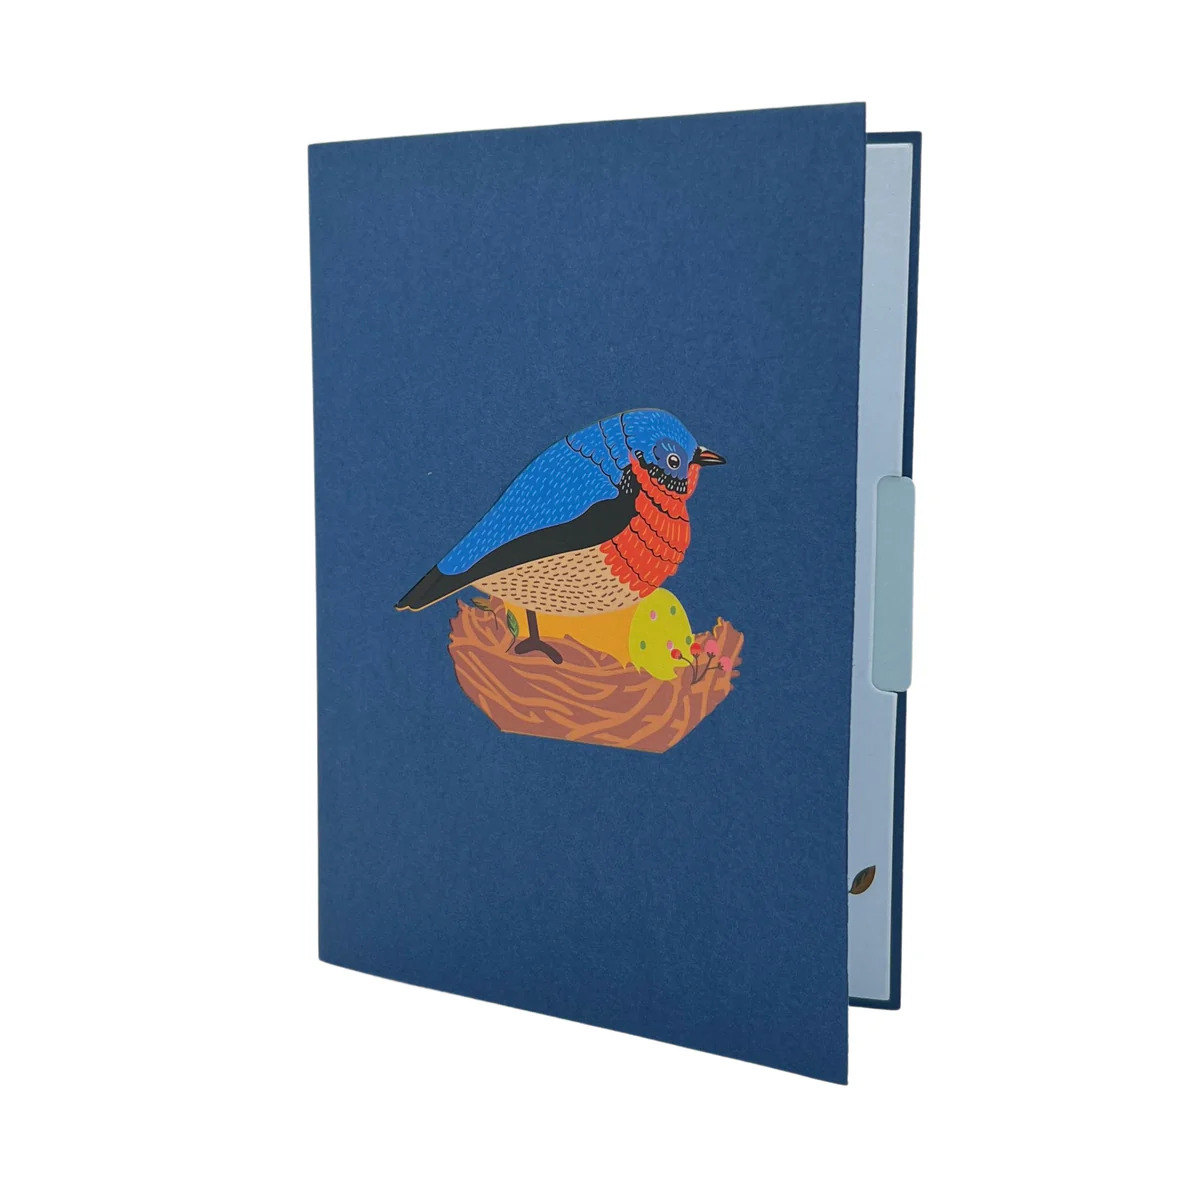 mother's day pop up card bluebird keeping eggs warm cover